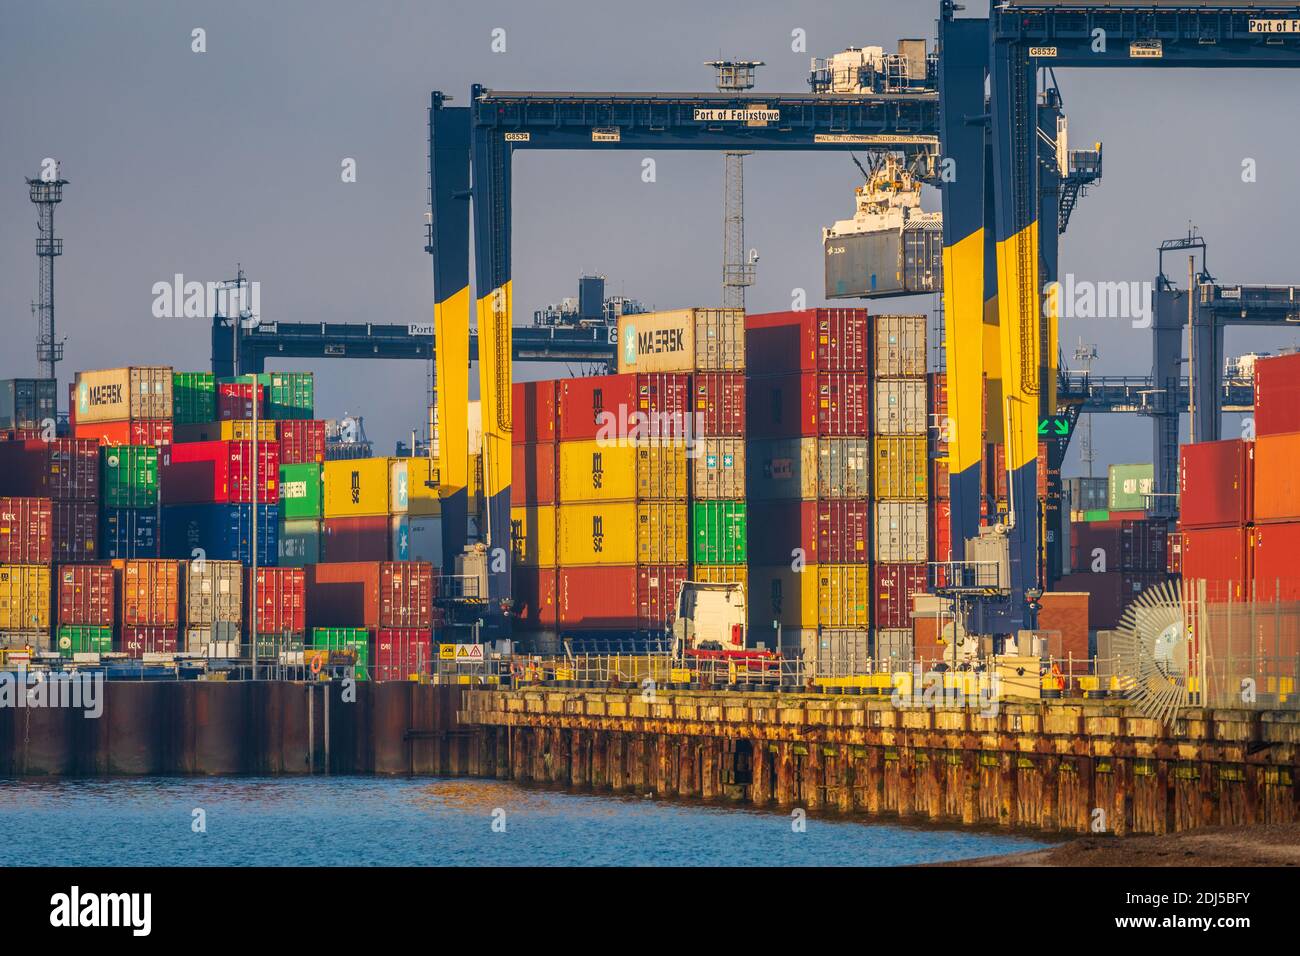 Felixstowe Port Congestion - stacked containers at Felixstowe which is sufferering delays and congestion ahead of the end of Brexit transition 2020. Stock Photo